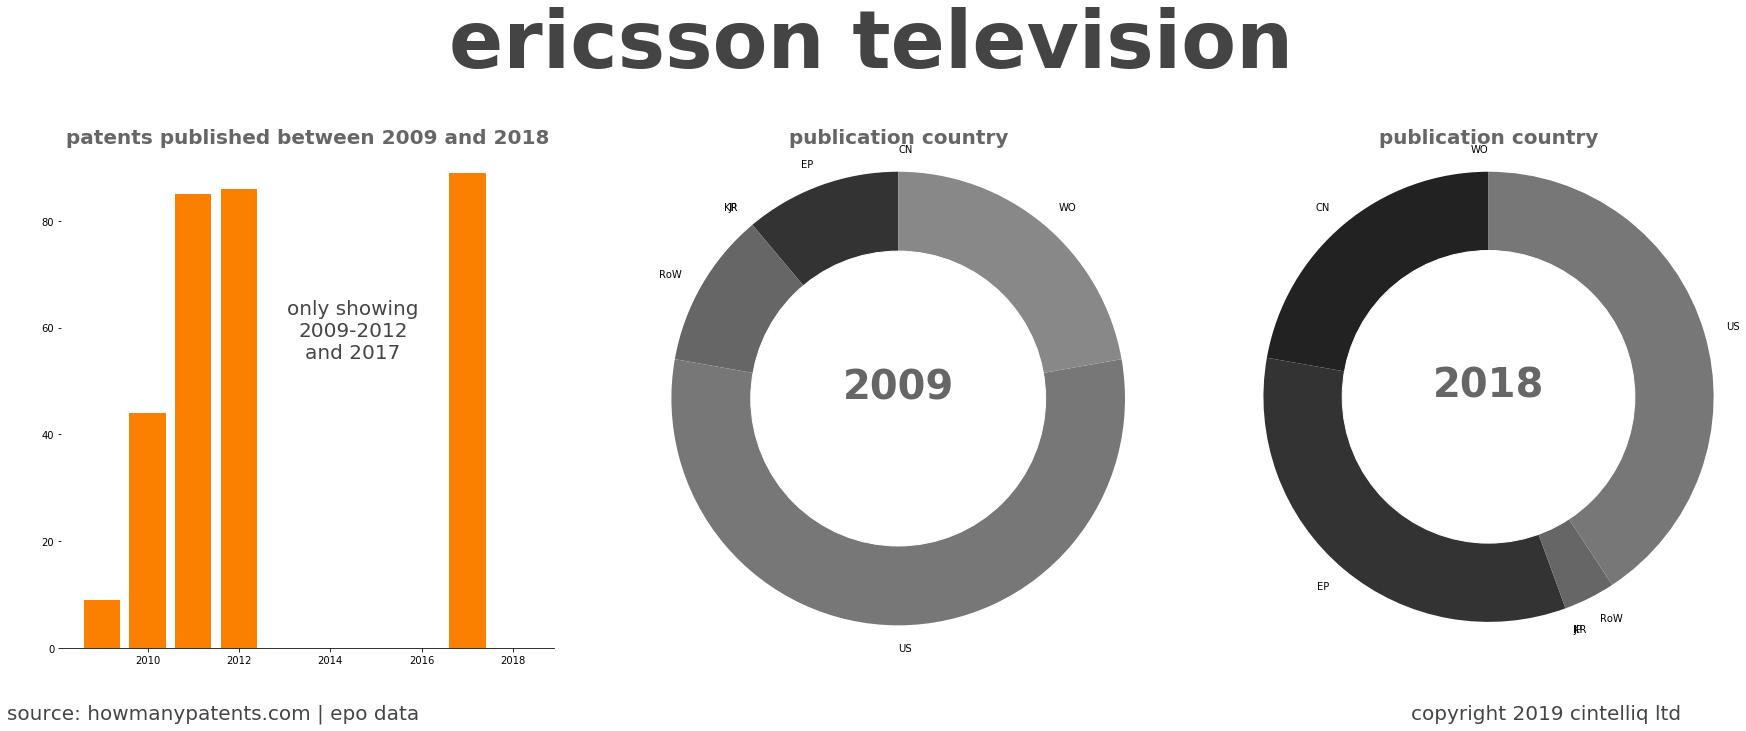 summary of patents for Ericsson Television